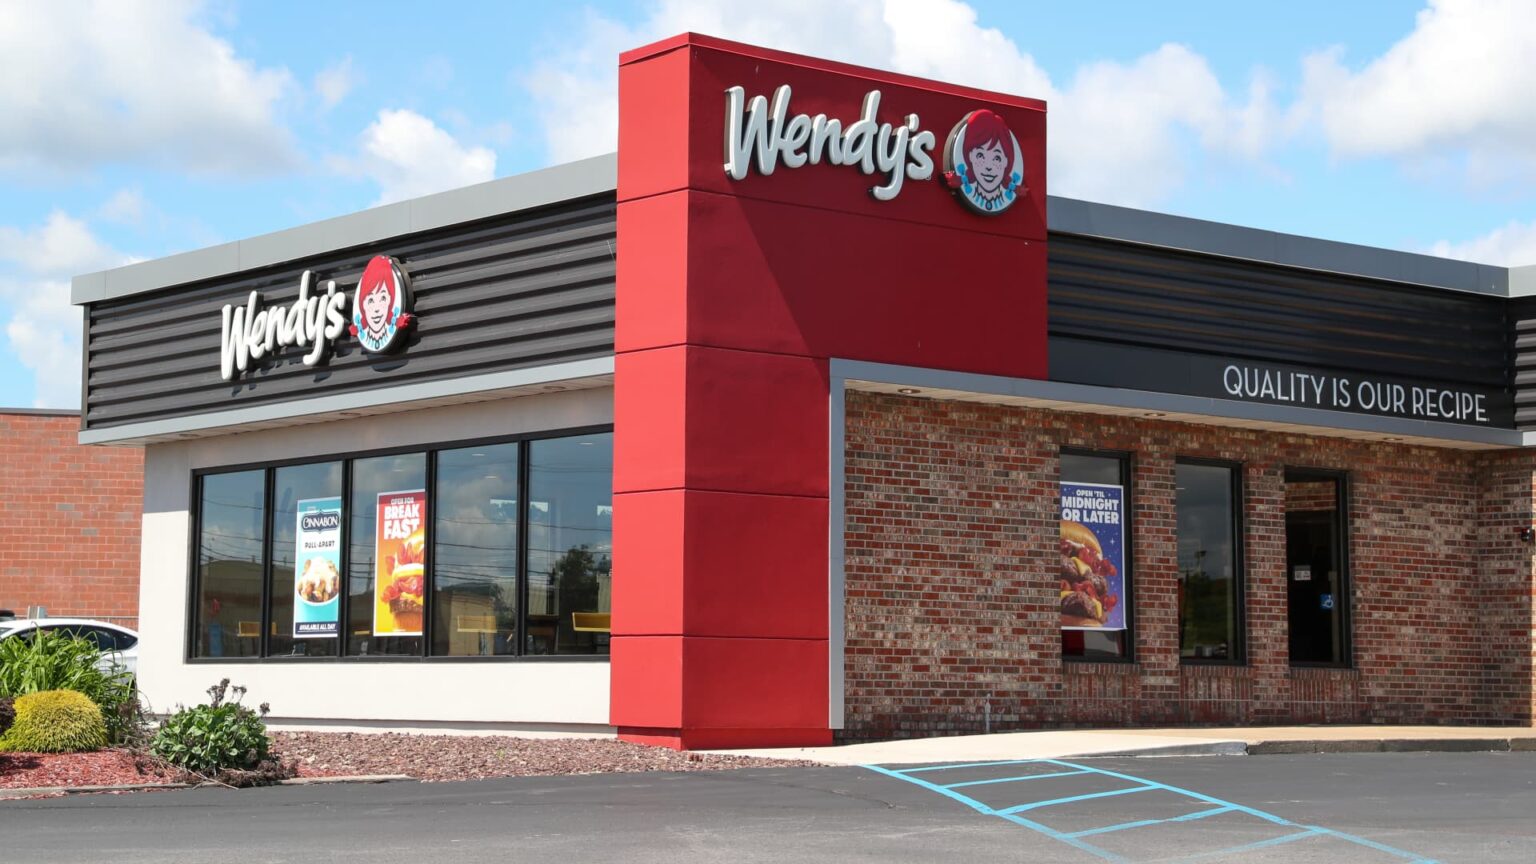 Wendy's will offer $3 breakfast meal deal after McDonald's value meal